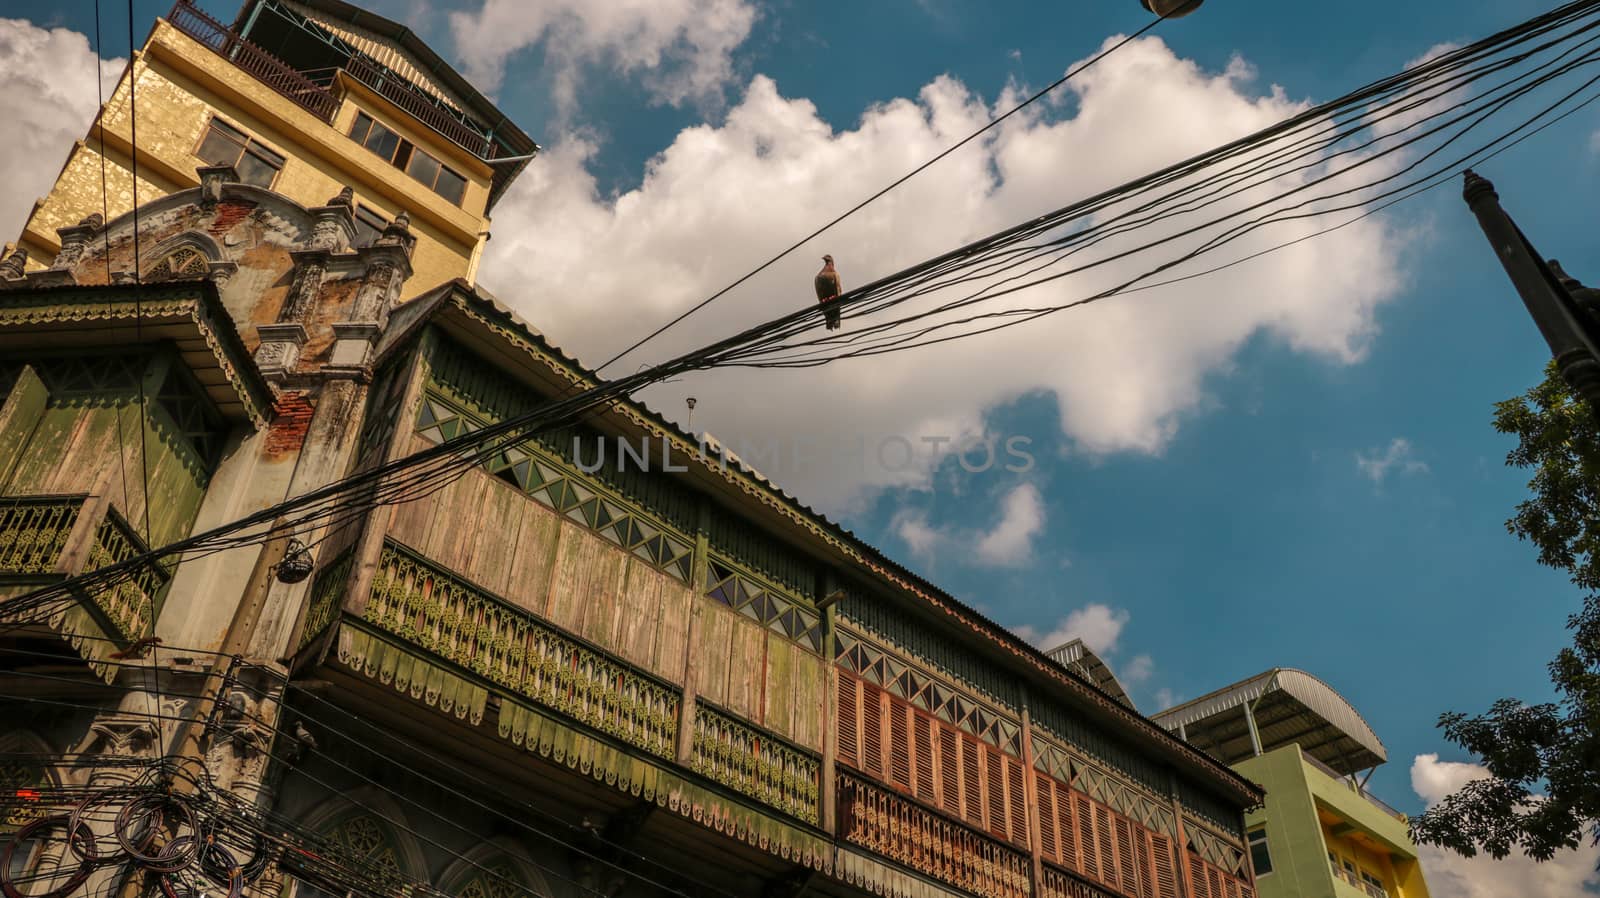 Ancient Wooden House with a Bird on Electric Wires. Low Angle View. Bright Sunny Sky with Clouds.